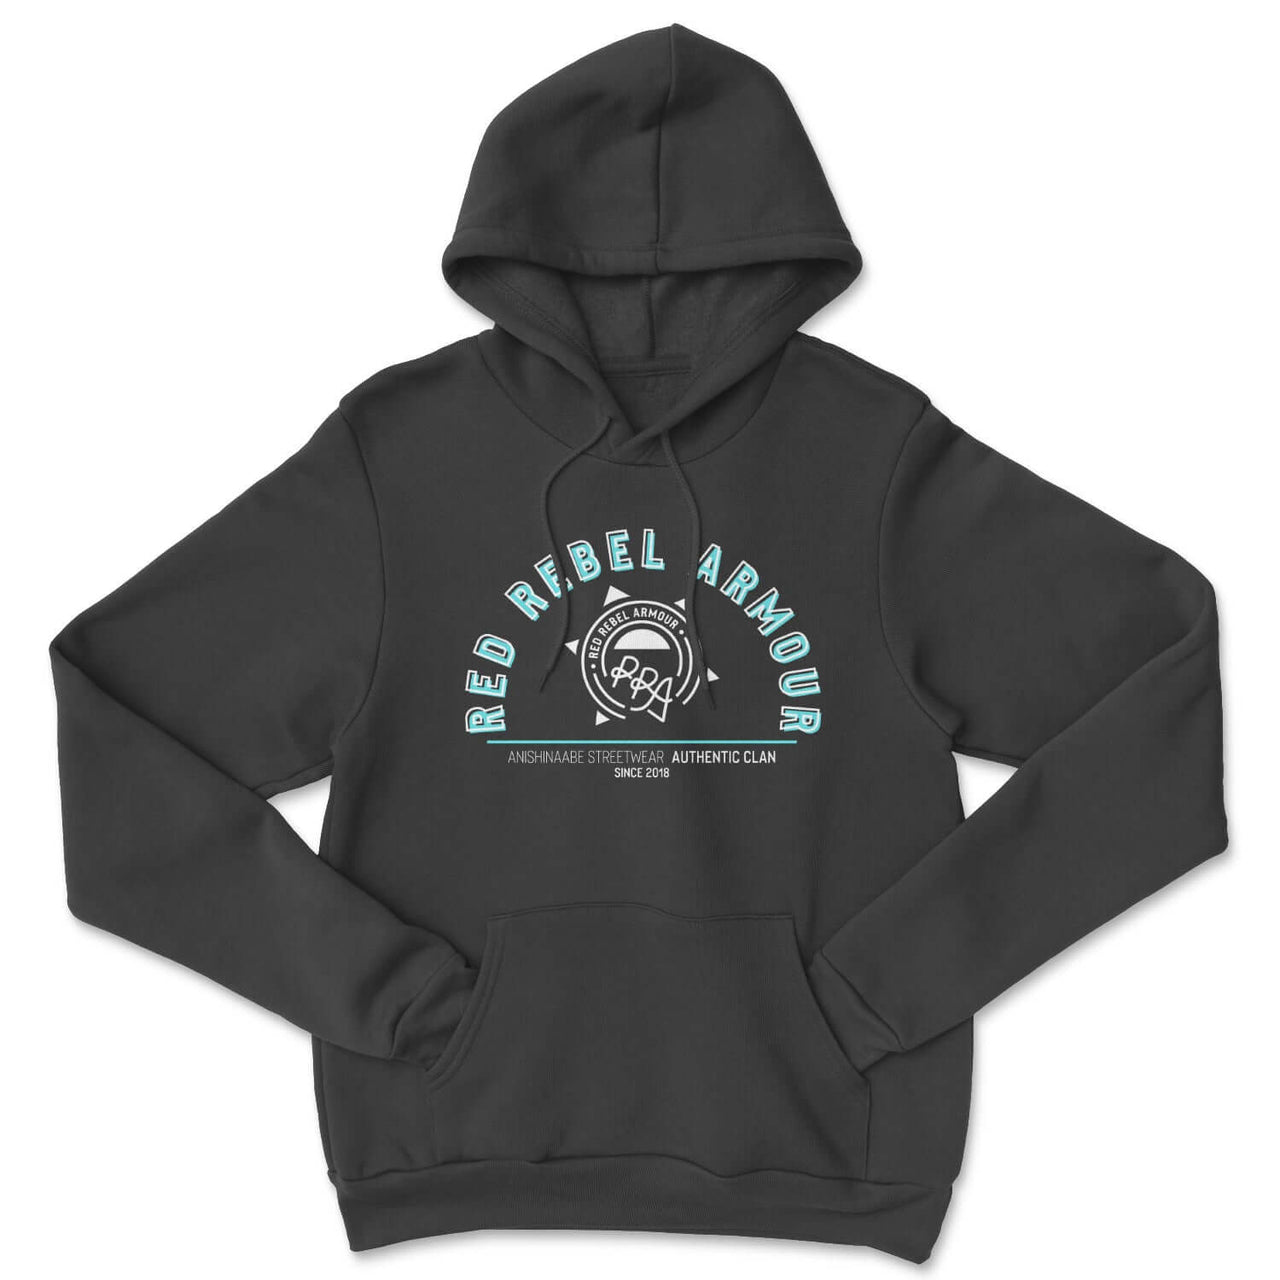 Authentic Clan Hoodie